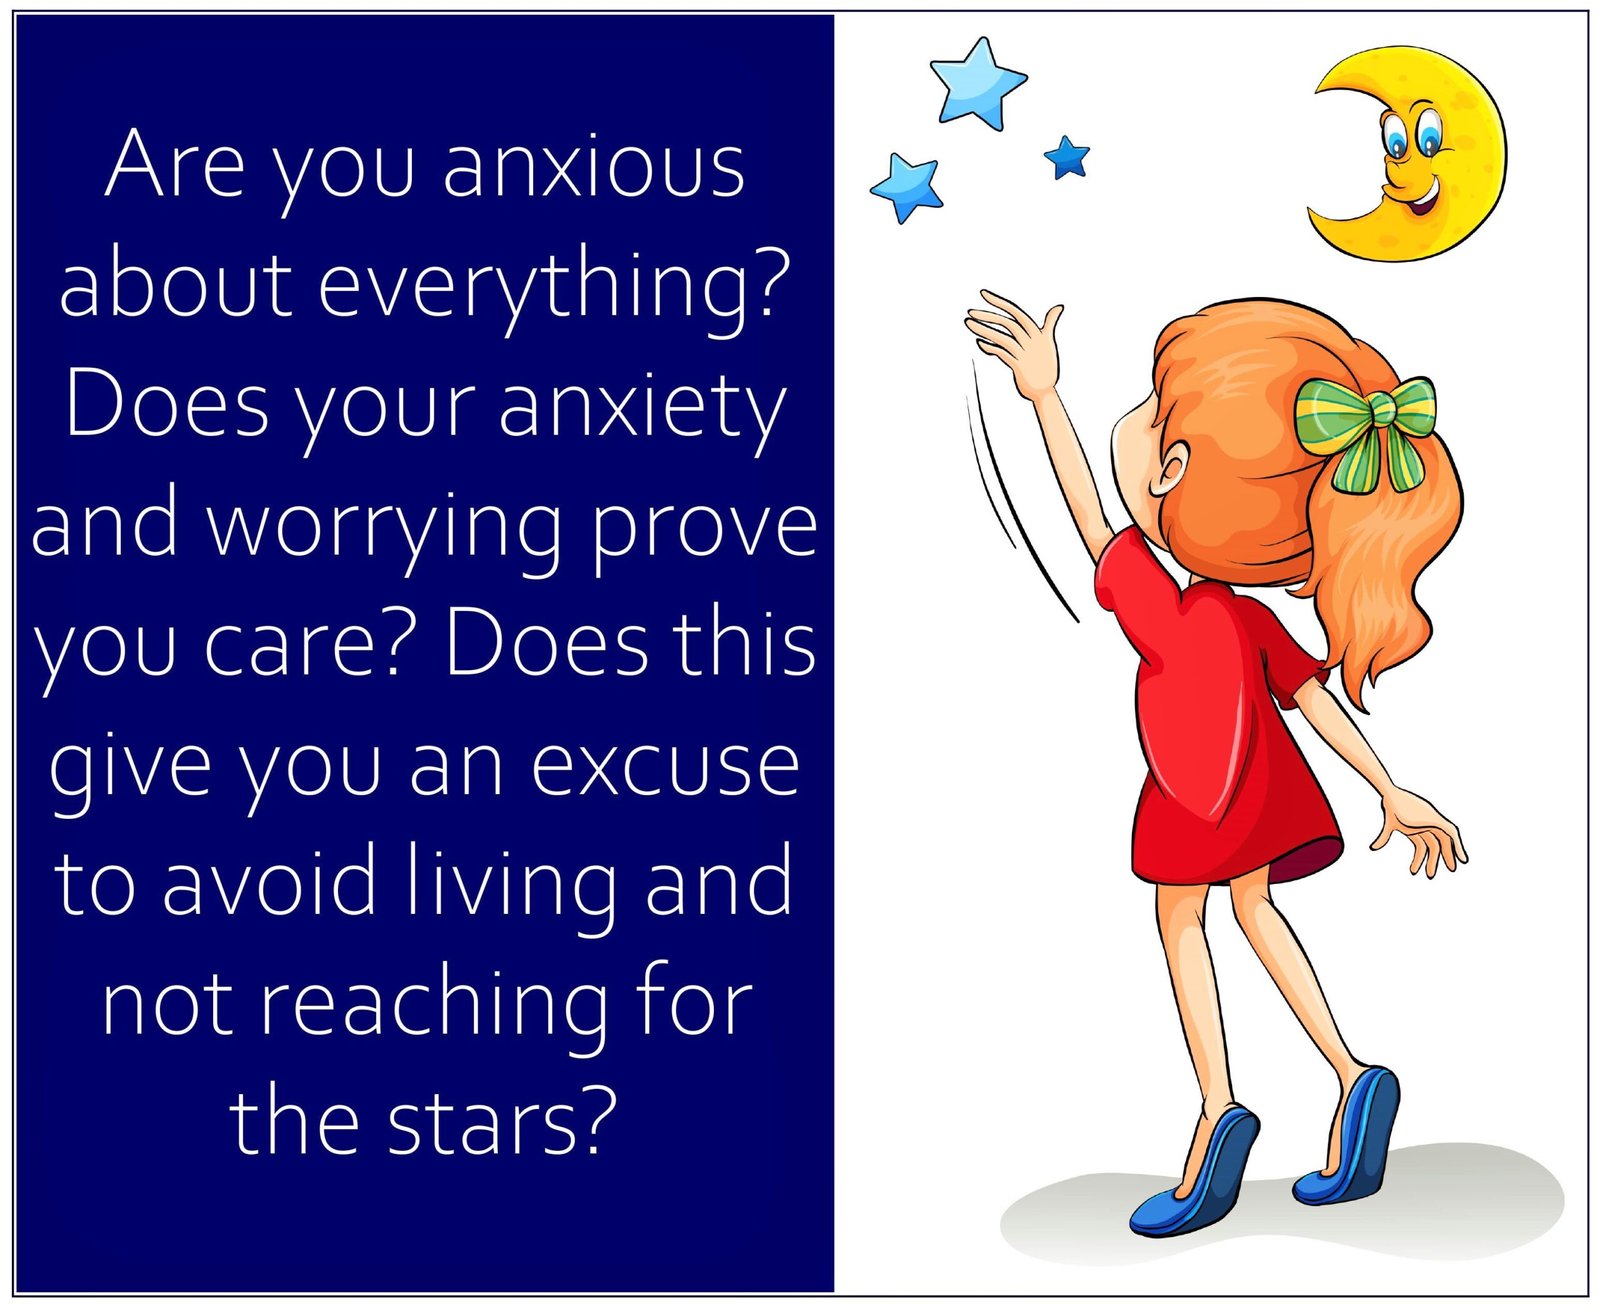 Are you anxious about everything